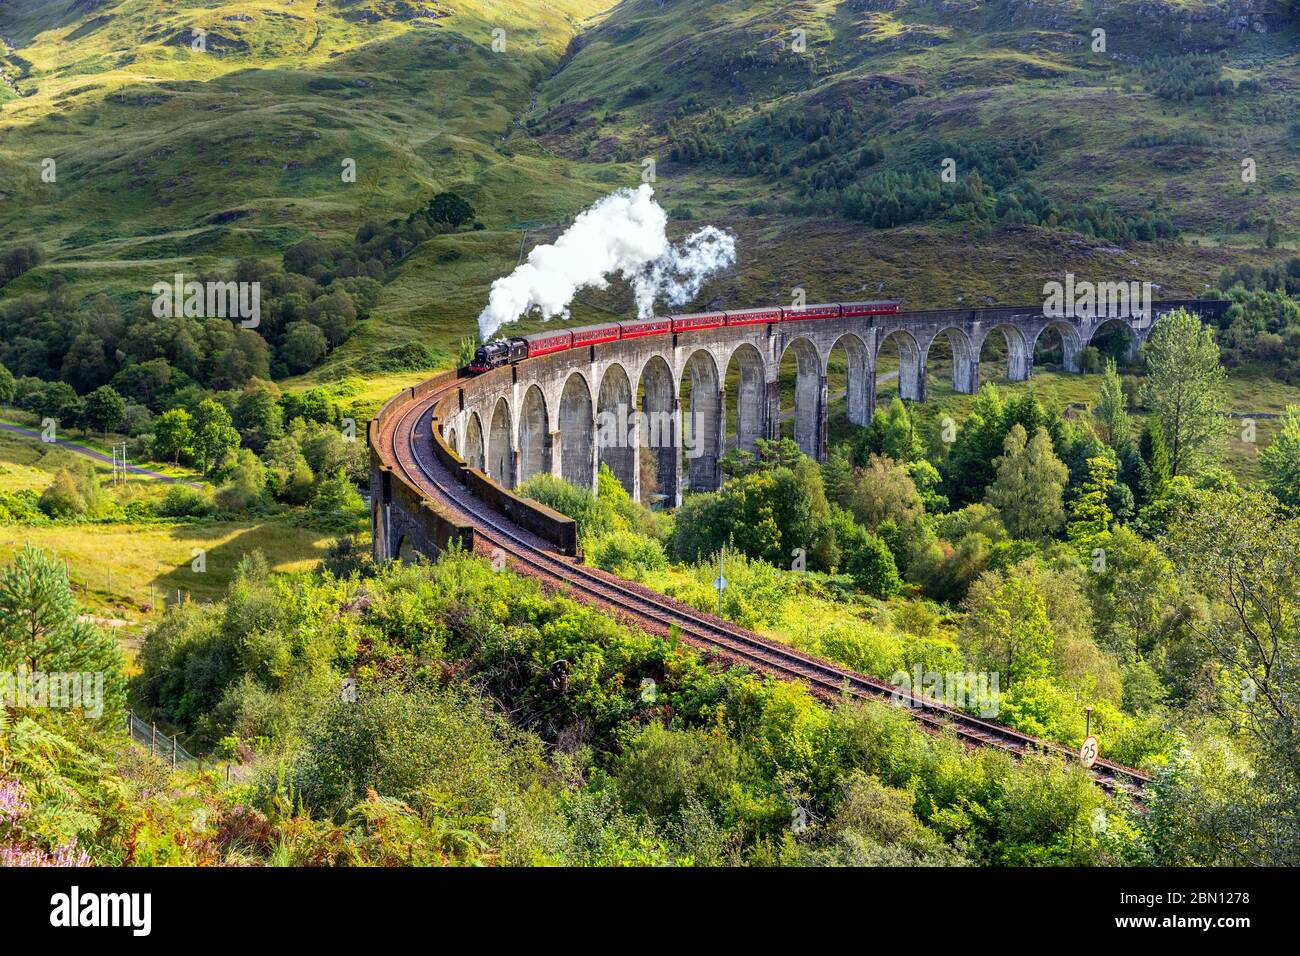 benzine Beroep parlement Jacobite Steam train (AKA the Hogwarts Express) is one of the world's great railway  journeys running on the West Highland Line in Scotland between For Stock  Photo - Alamy